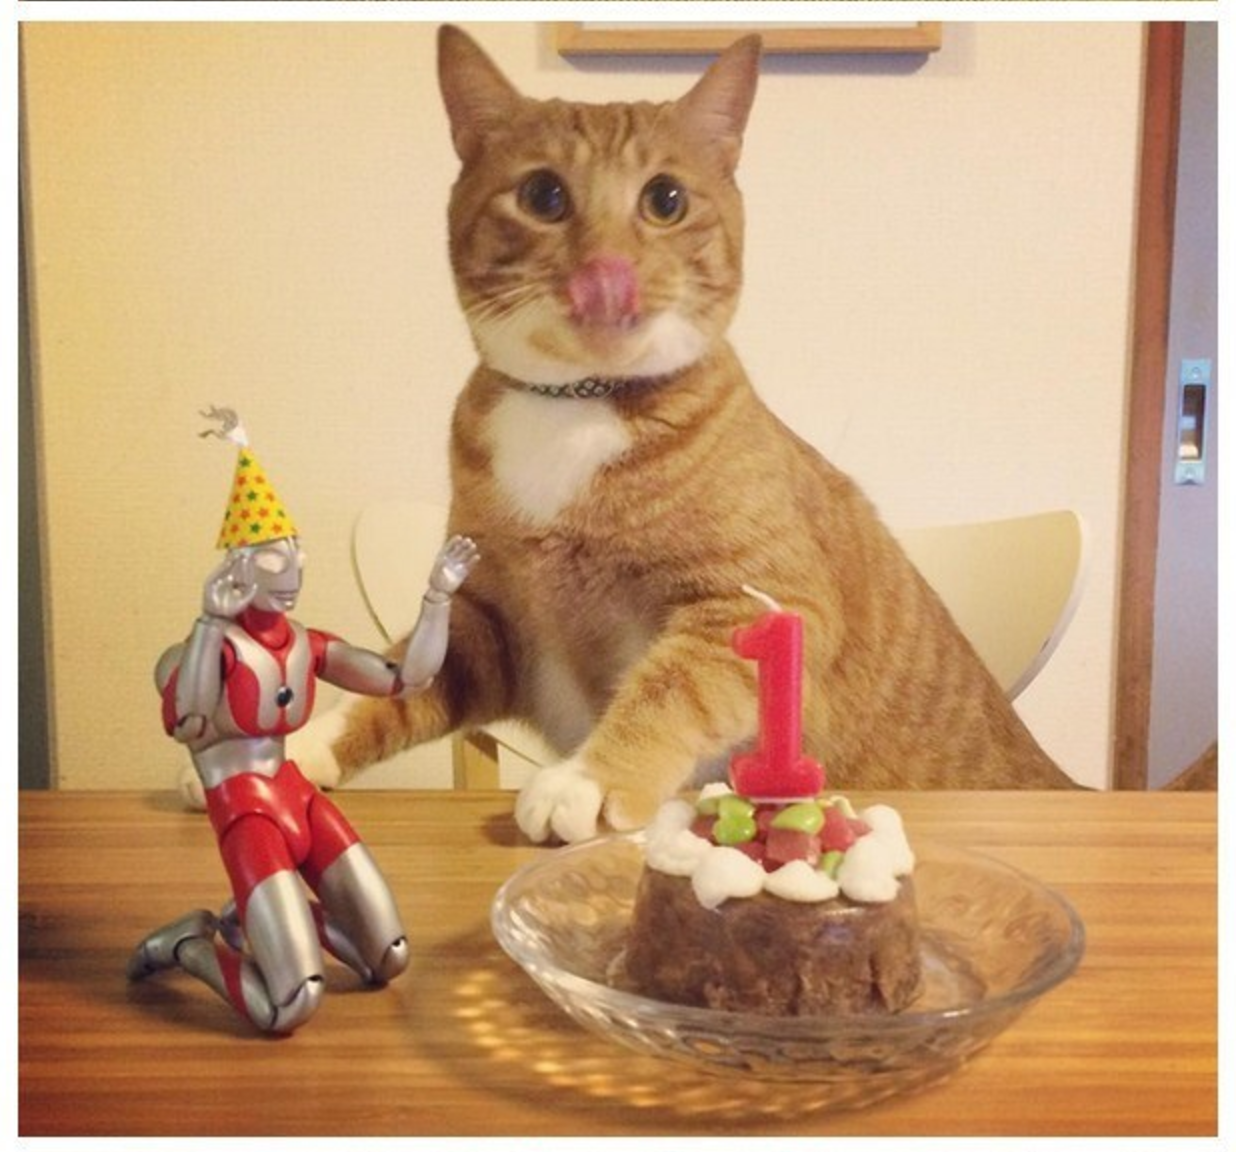 Kitten Grows Up With Ultraman By His Side – Meowingtons